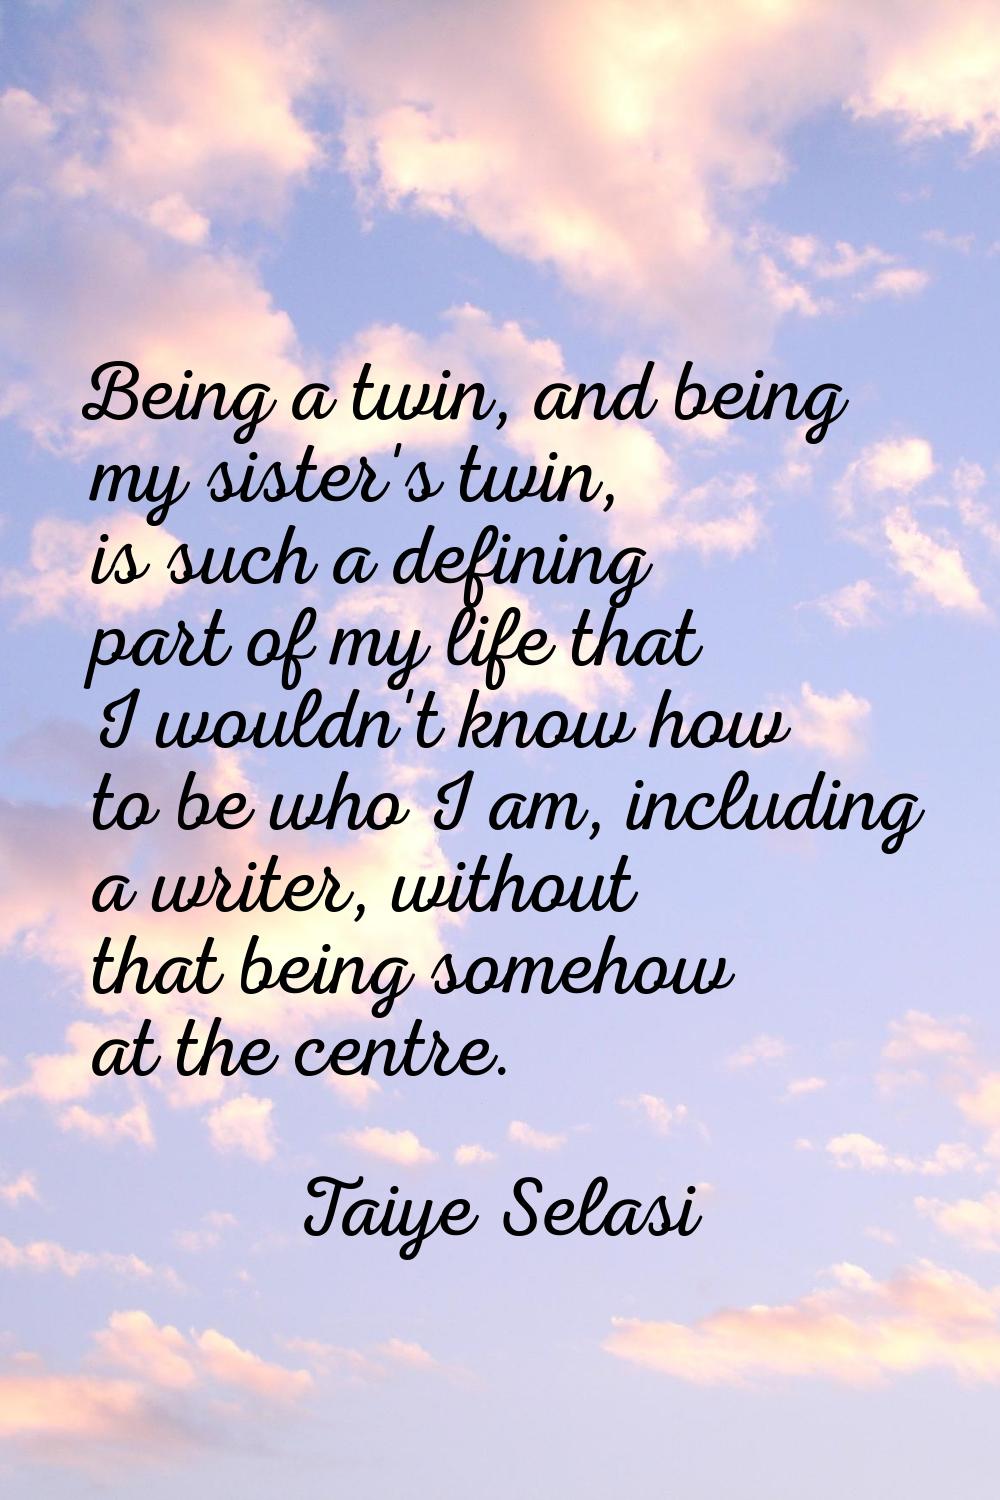 Being a twin, and being my sister's twin, is such a defining part of my life that I wouldn't know h